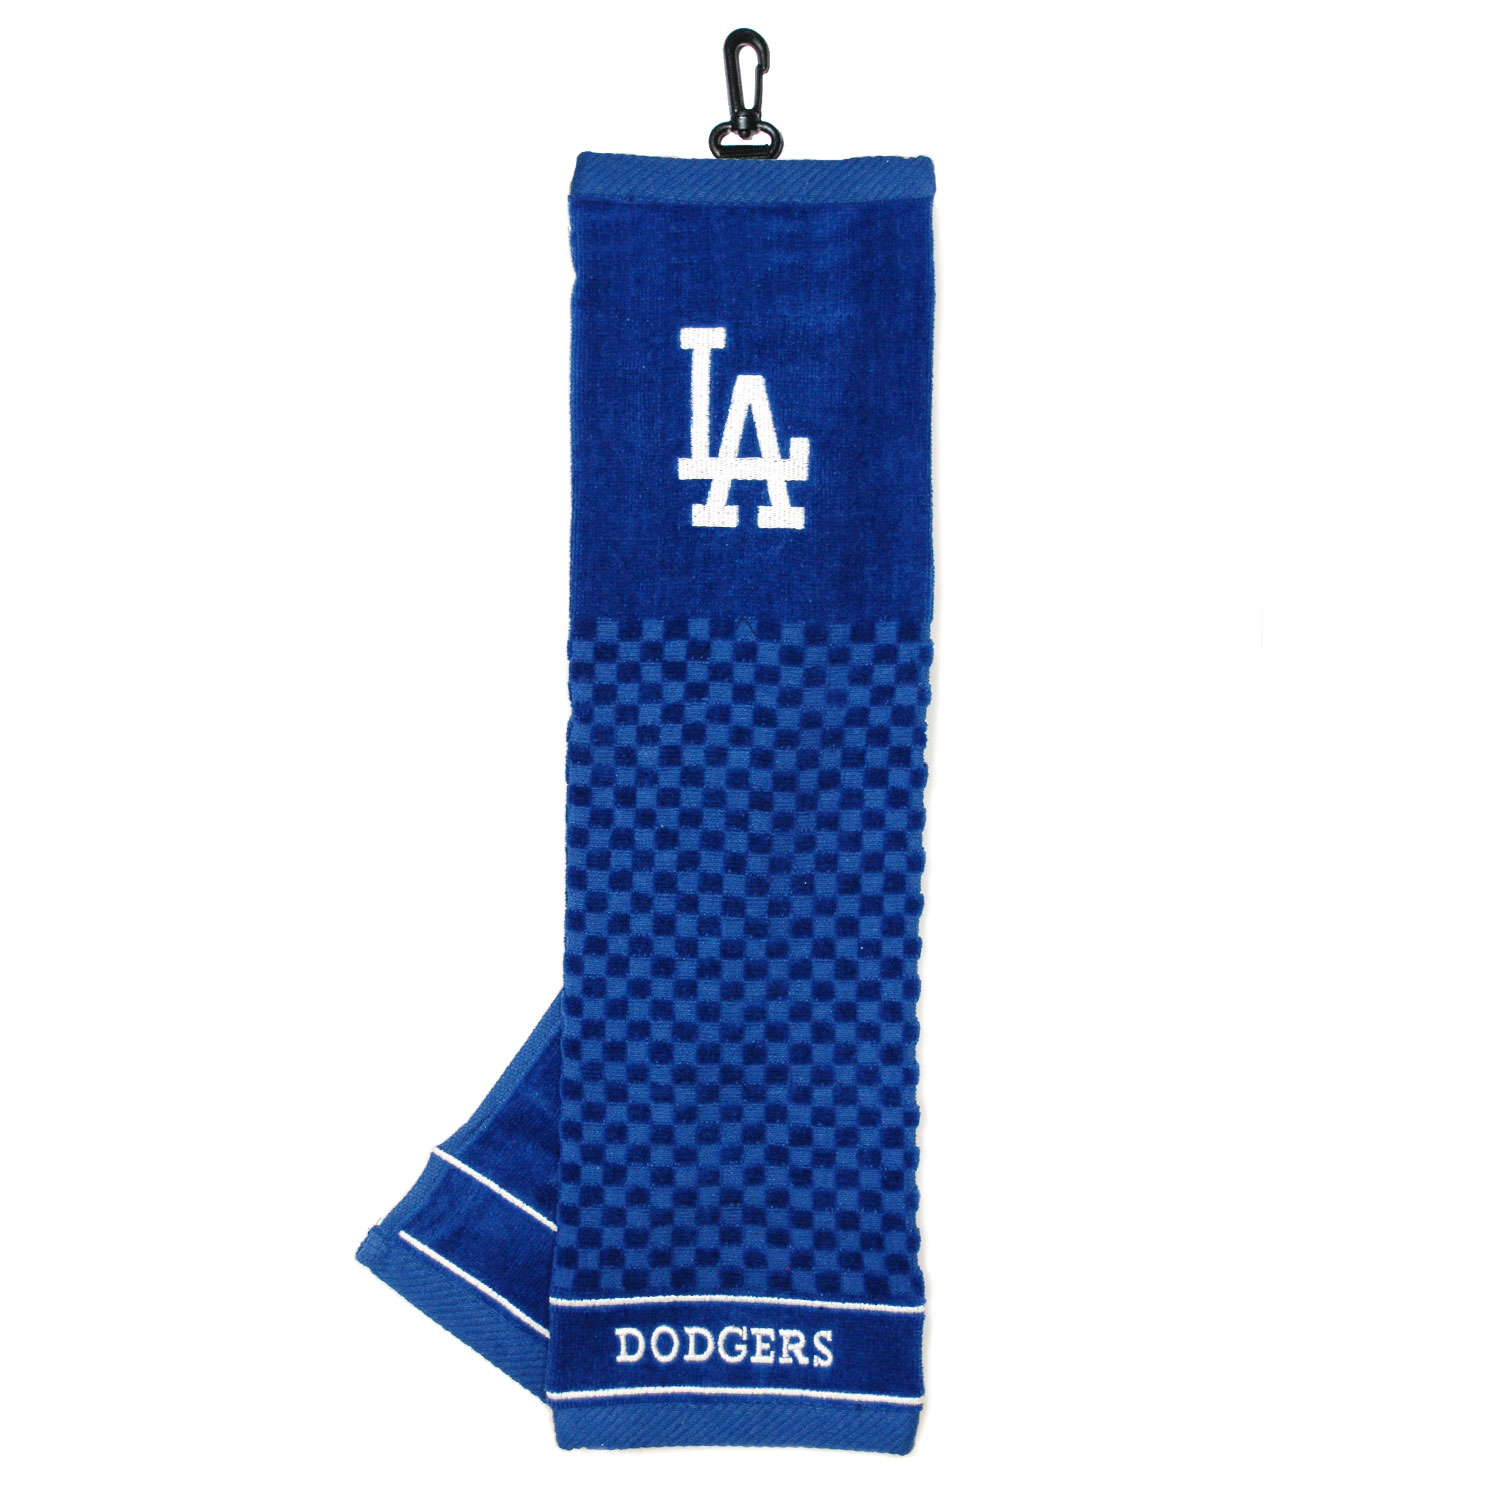 Los Angeles Dodgers Embroidered Towel